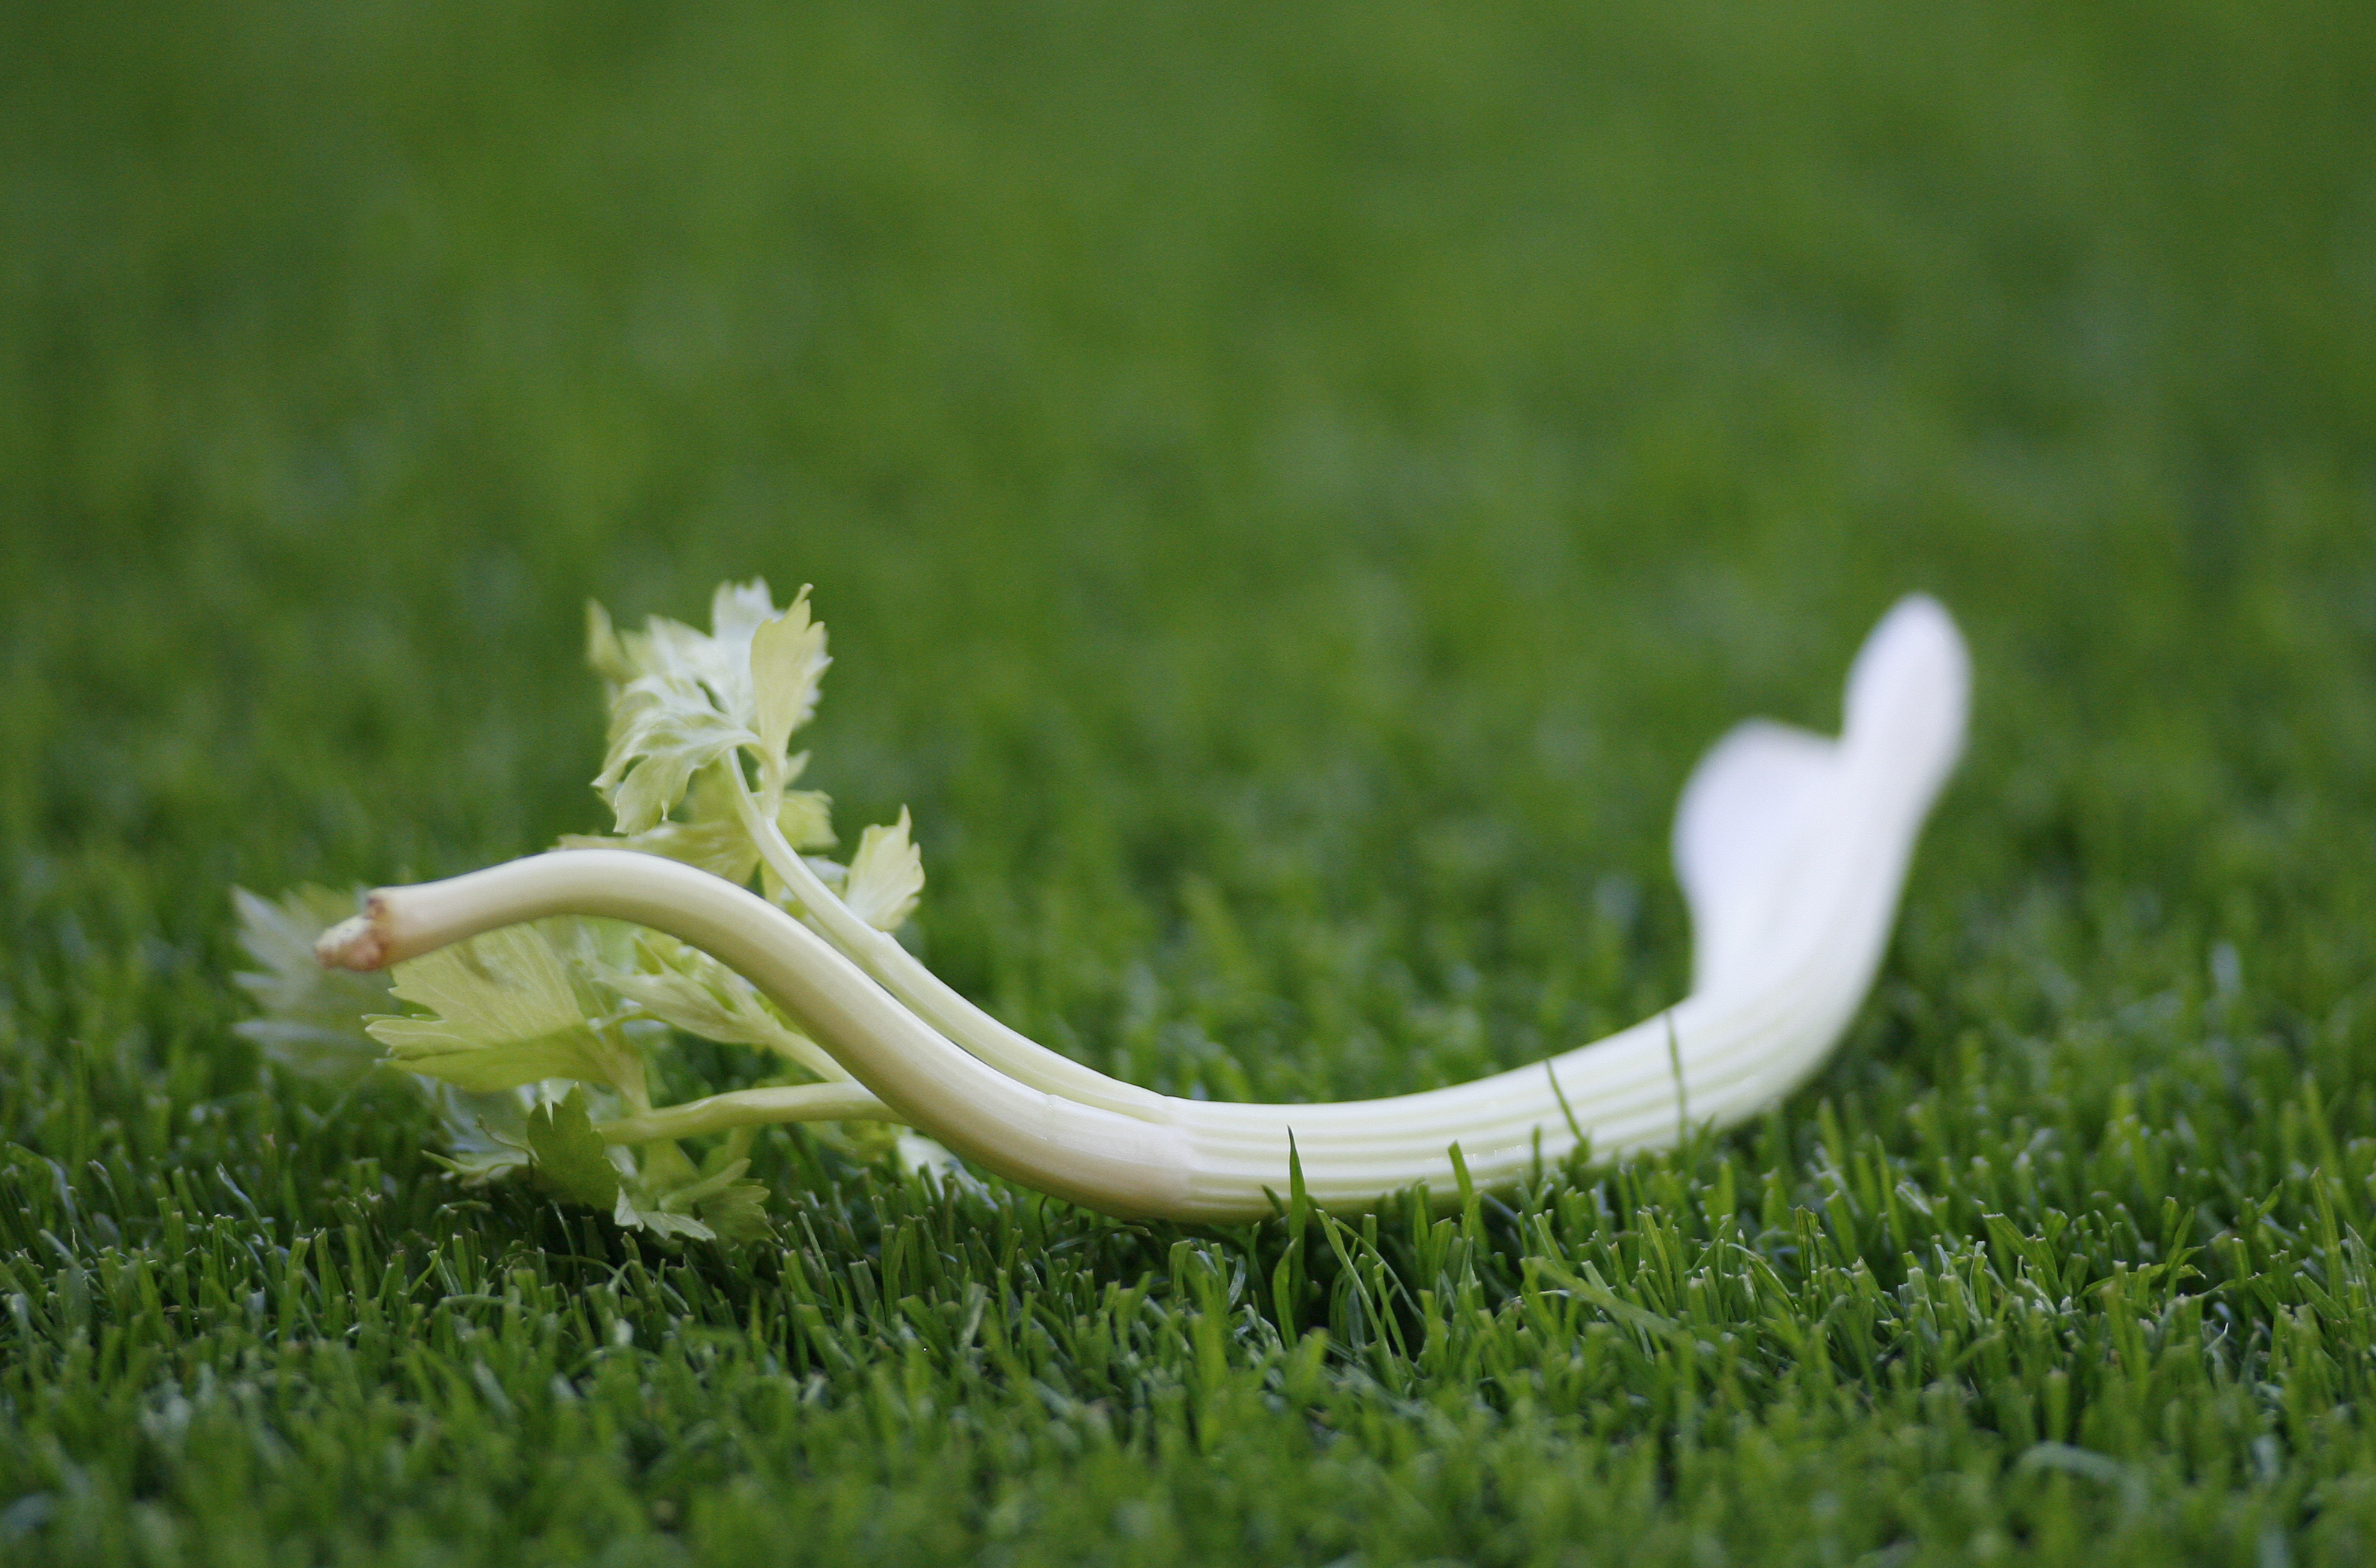 Chelsea chiefs BANNED celery from Stamford Bridge in 2007